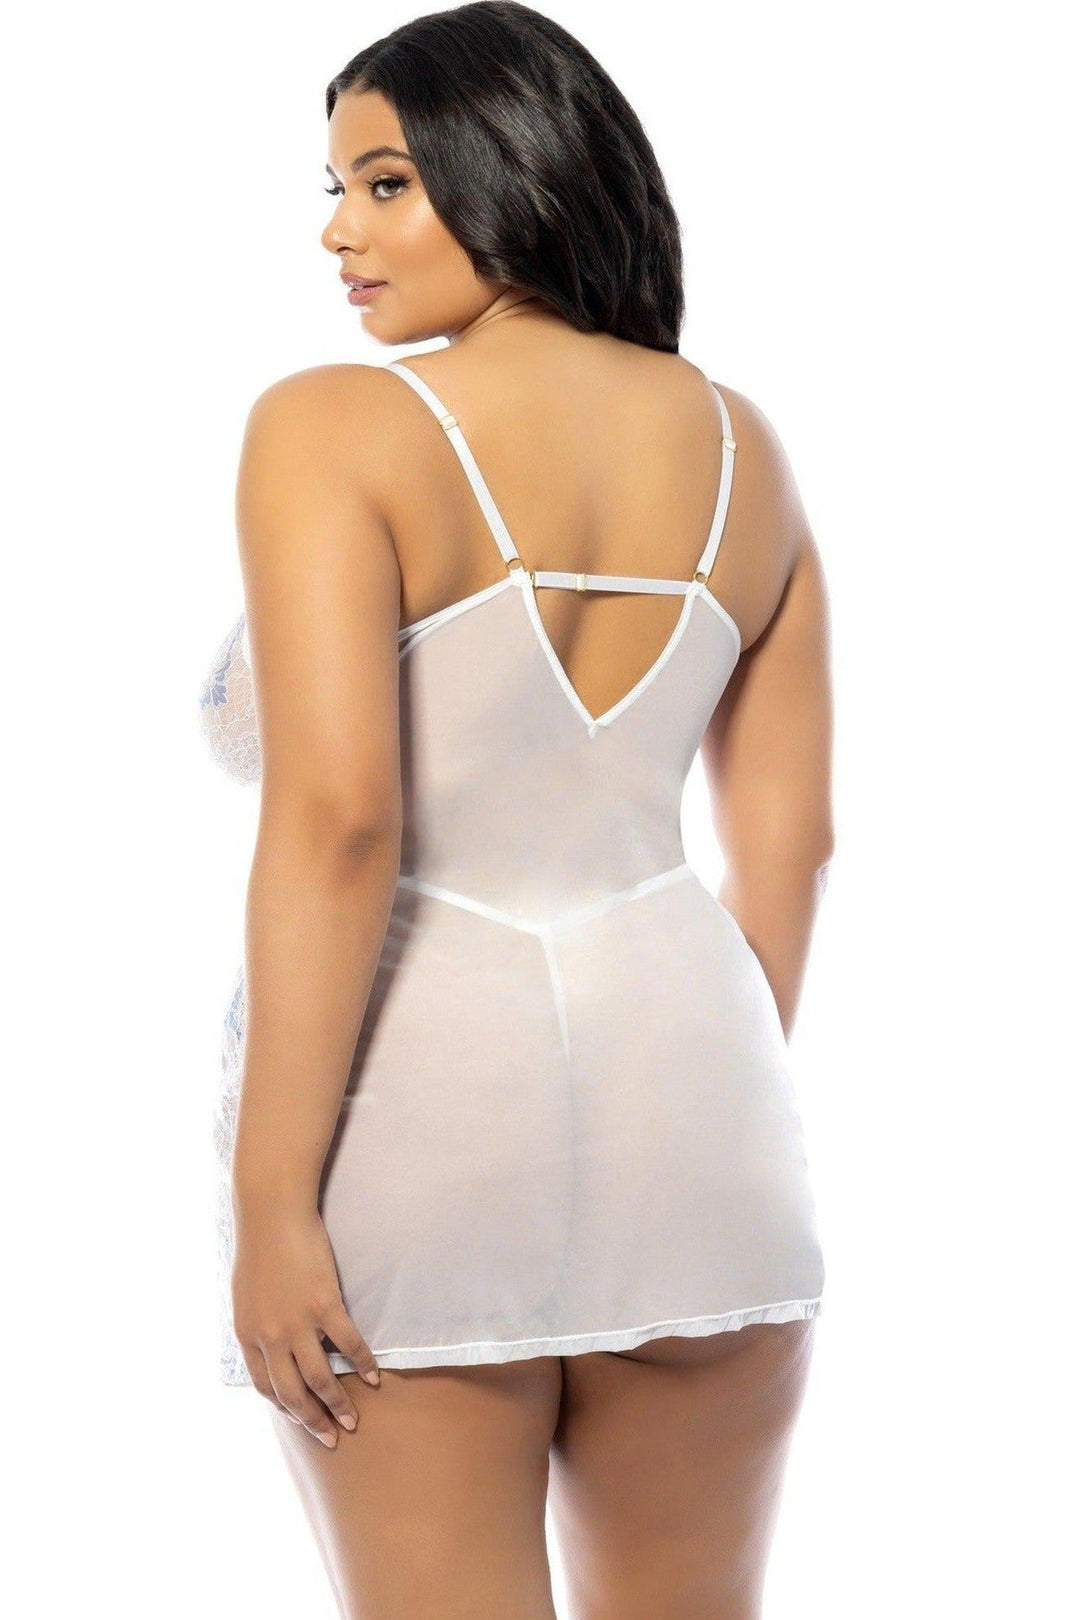 Soft Cup Fitted Babydoll with Romantic Lace and Matching G-String | Plus Size White